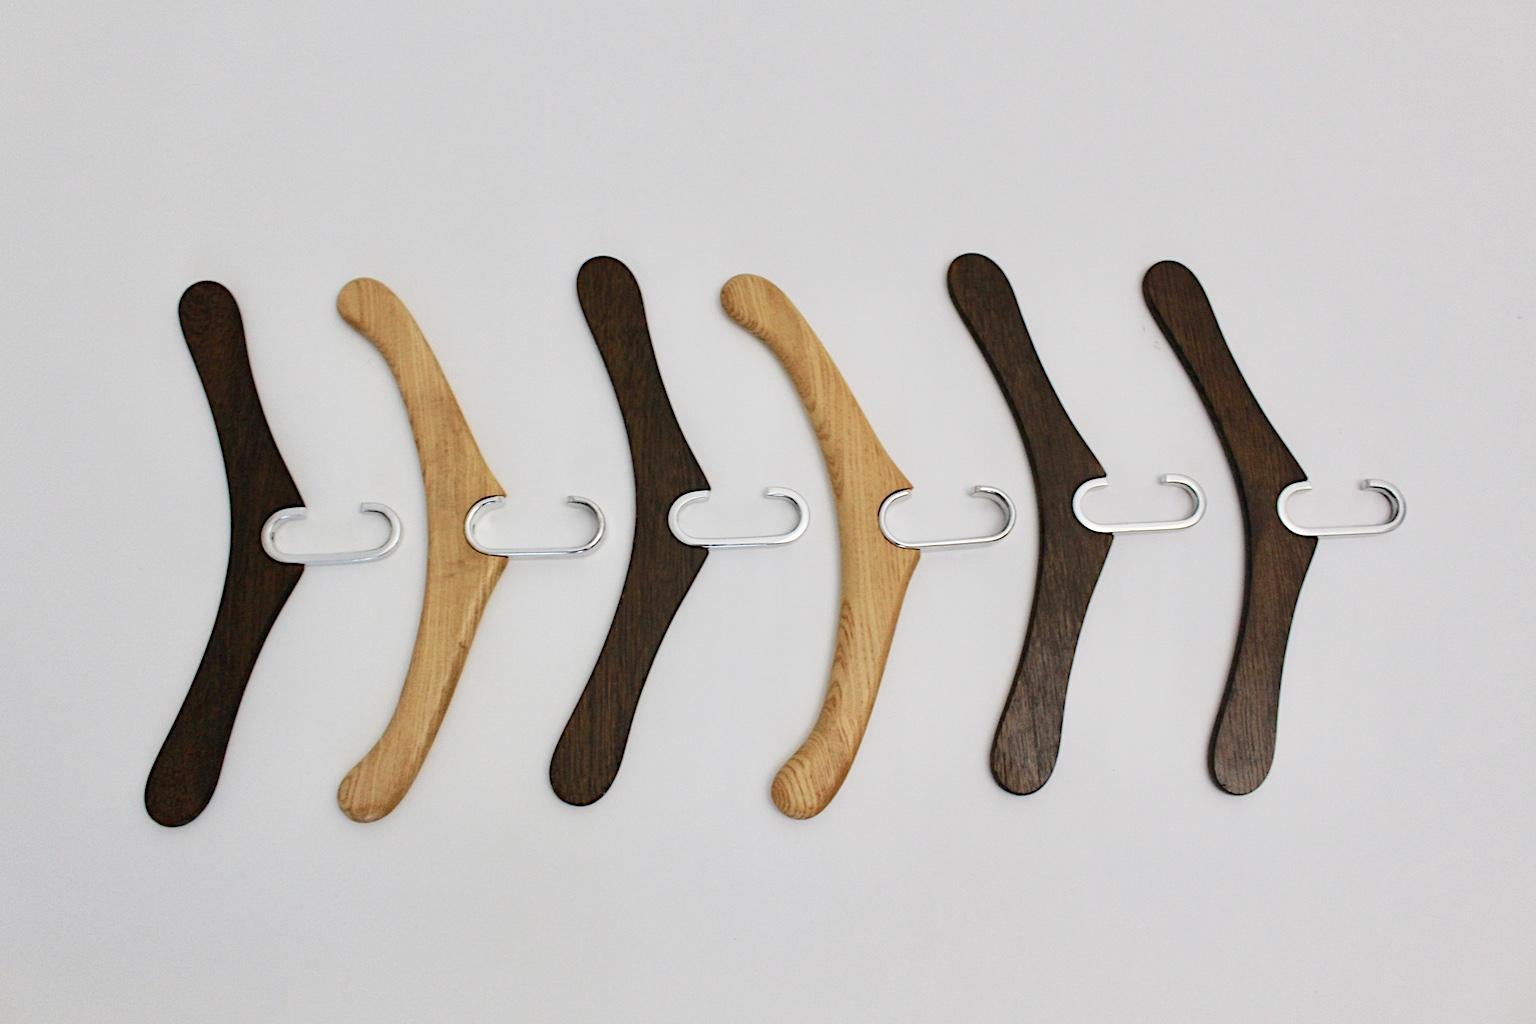 A set of six modernist vintage oak cloth hangers, which were designed and made in Austria, circa 1970.
Two pieces were made out of colorless lacquered oakwood and four pieces were made out of brown stained oakwood. All six pieces show an aluminum C